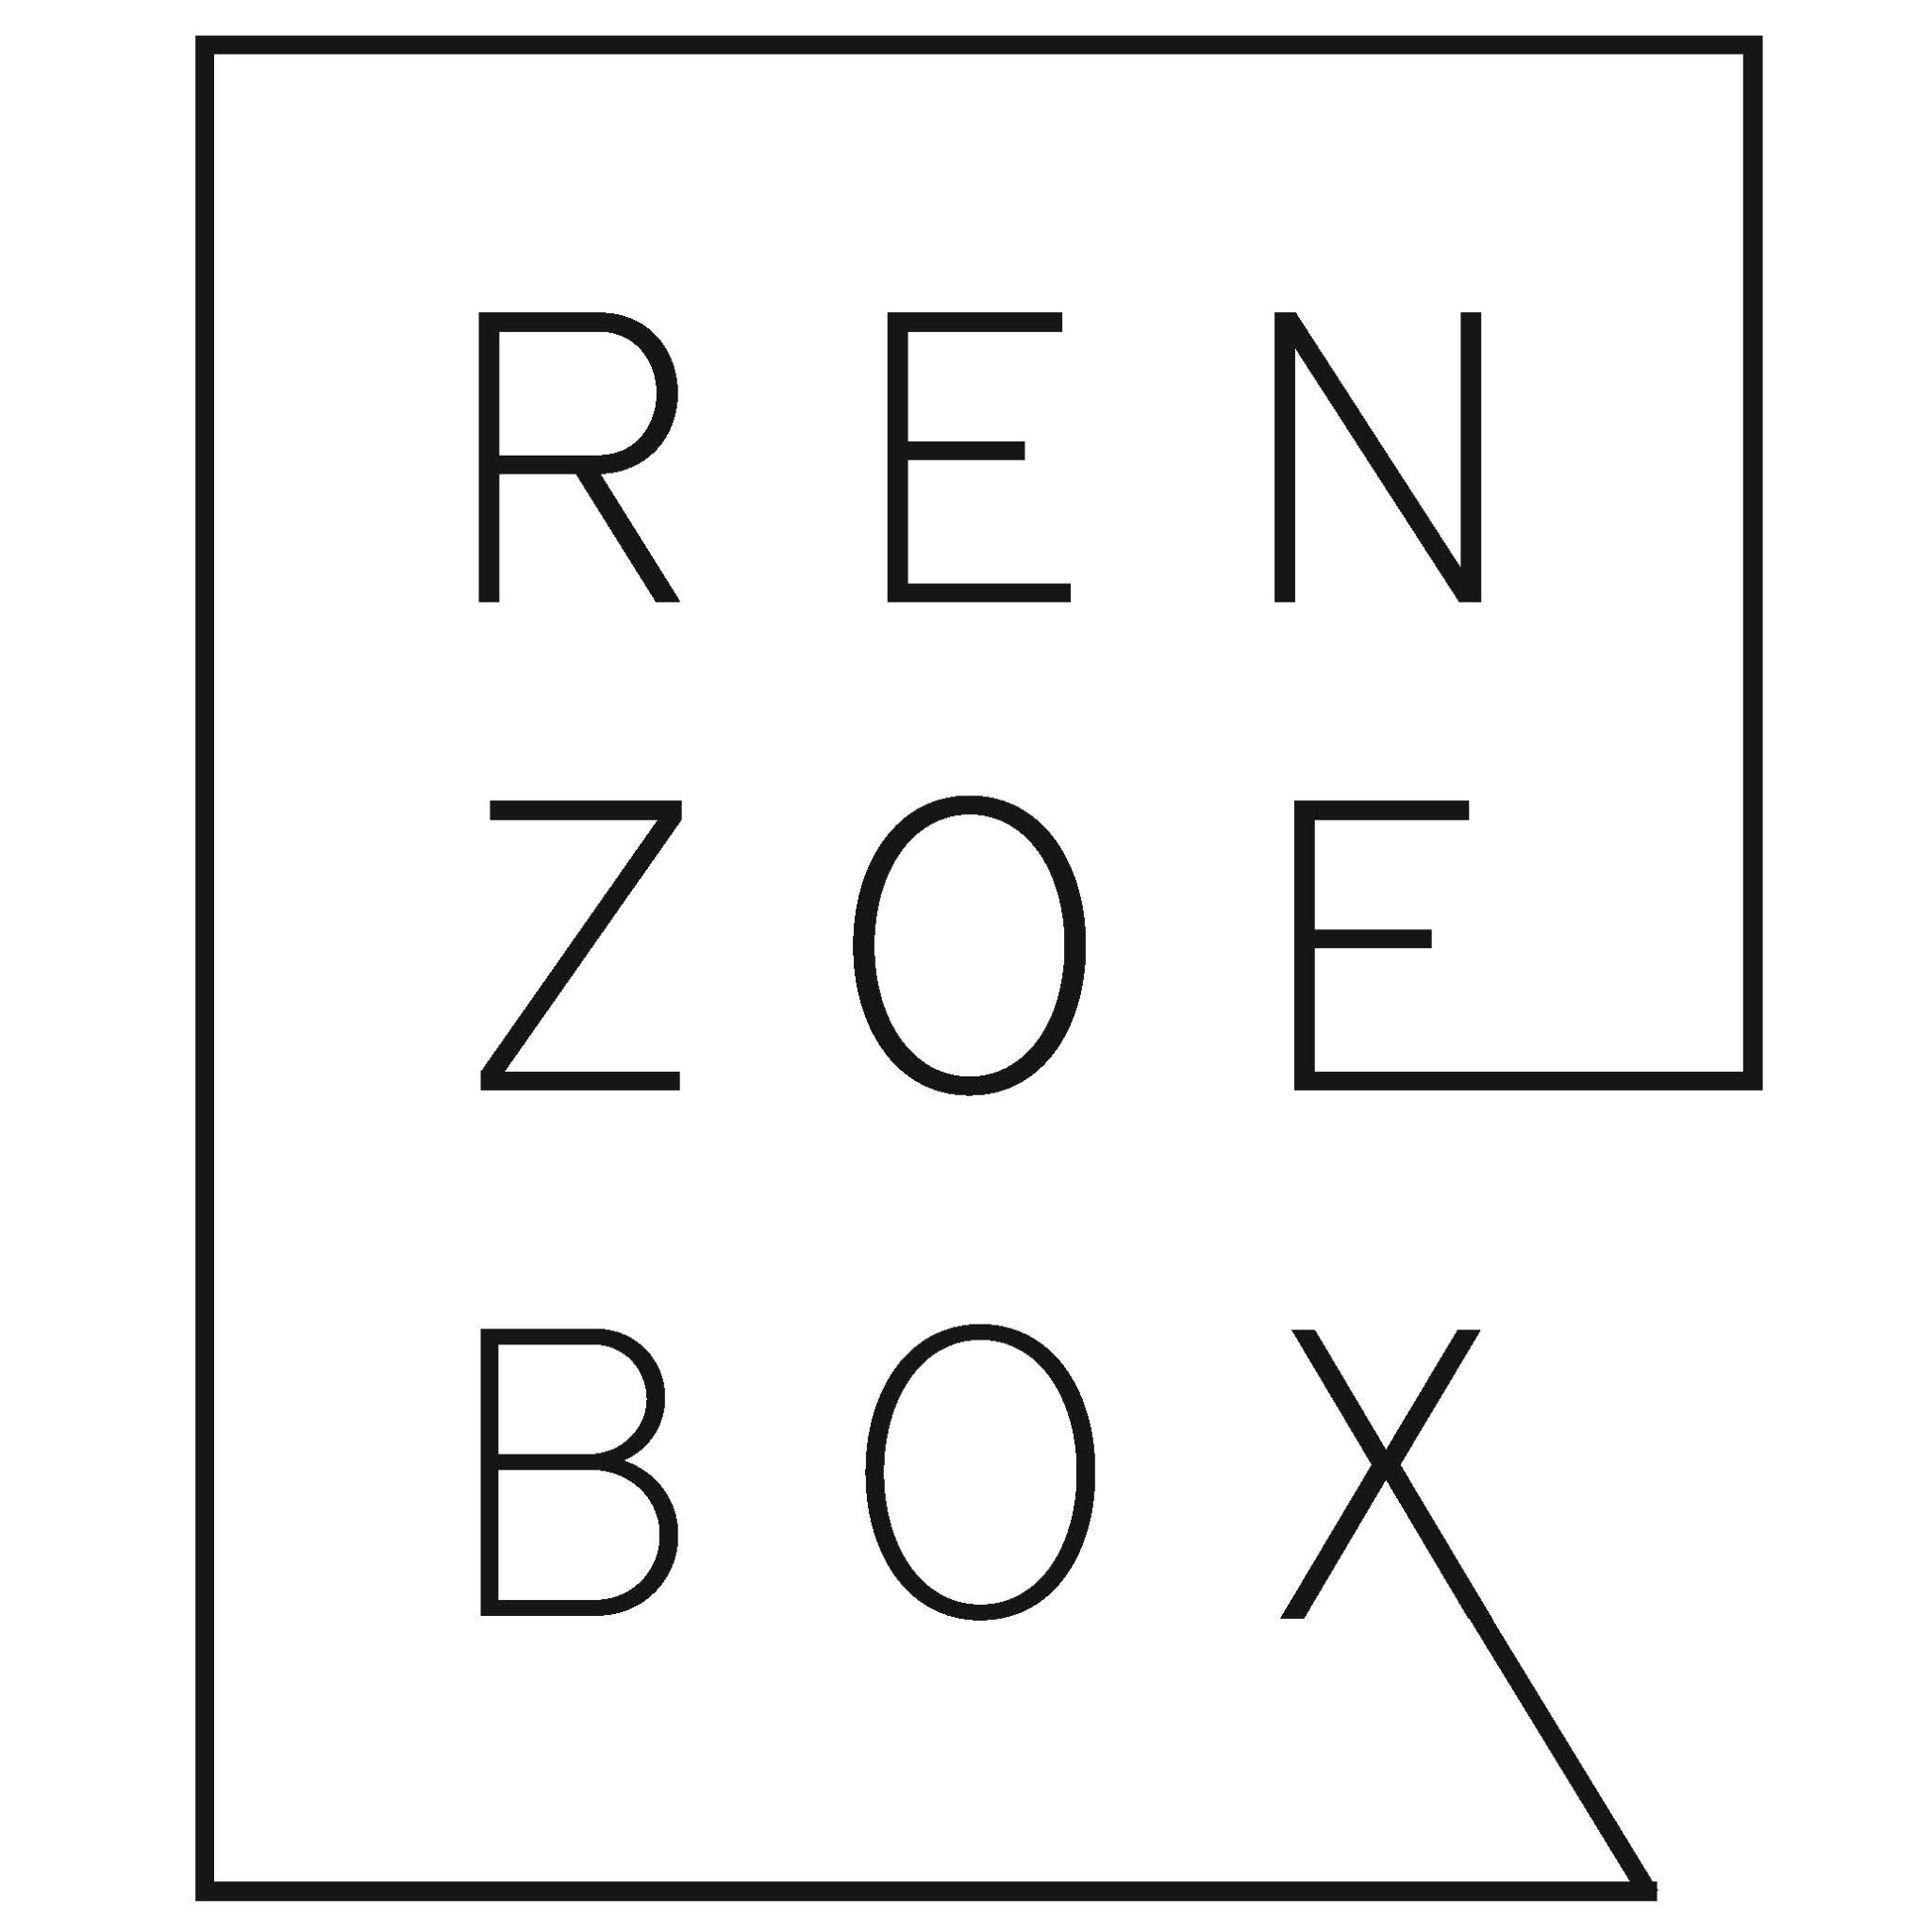 Renzoe Box is the first beauty product that conveniently holds all of your makeup brands in one place. Launching soon!